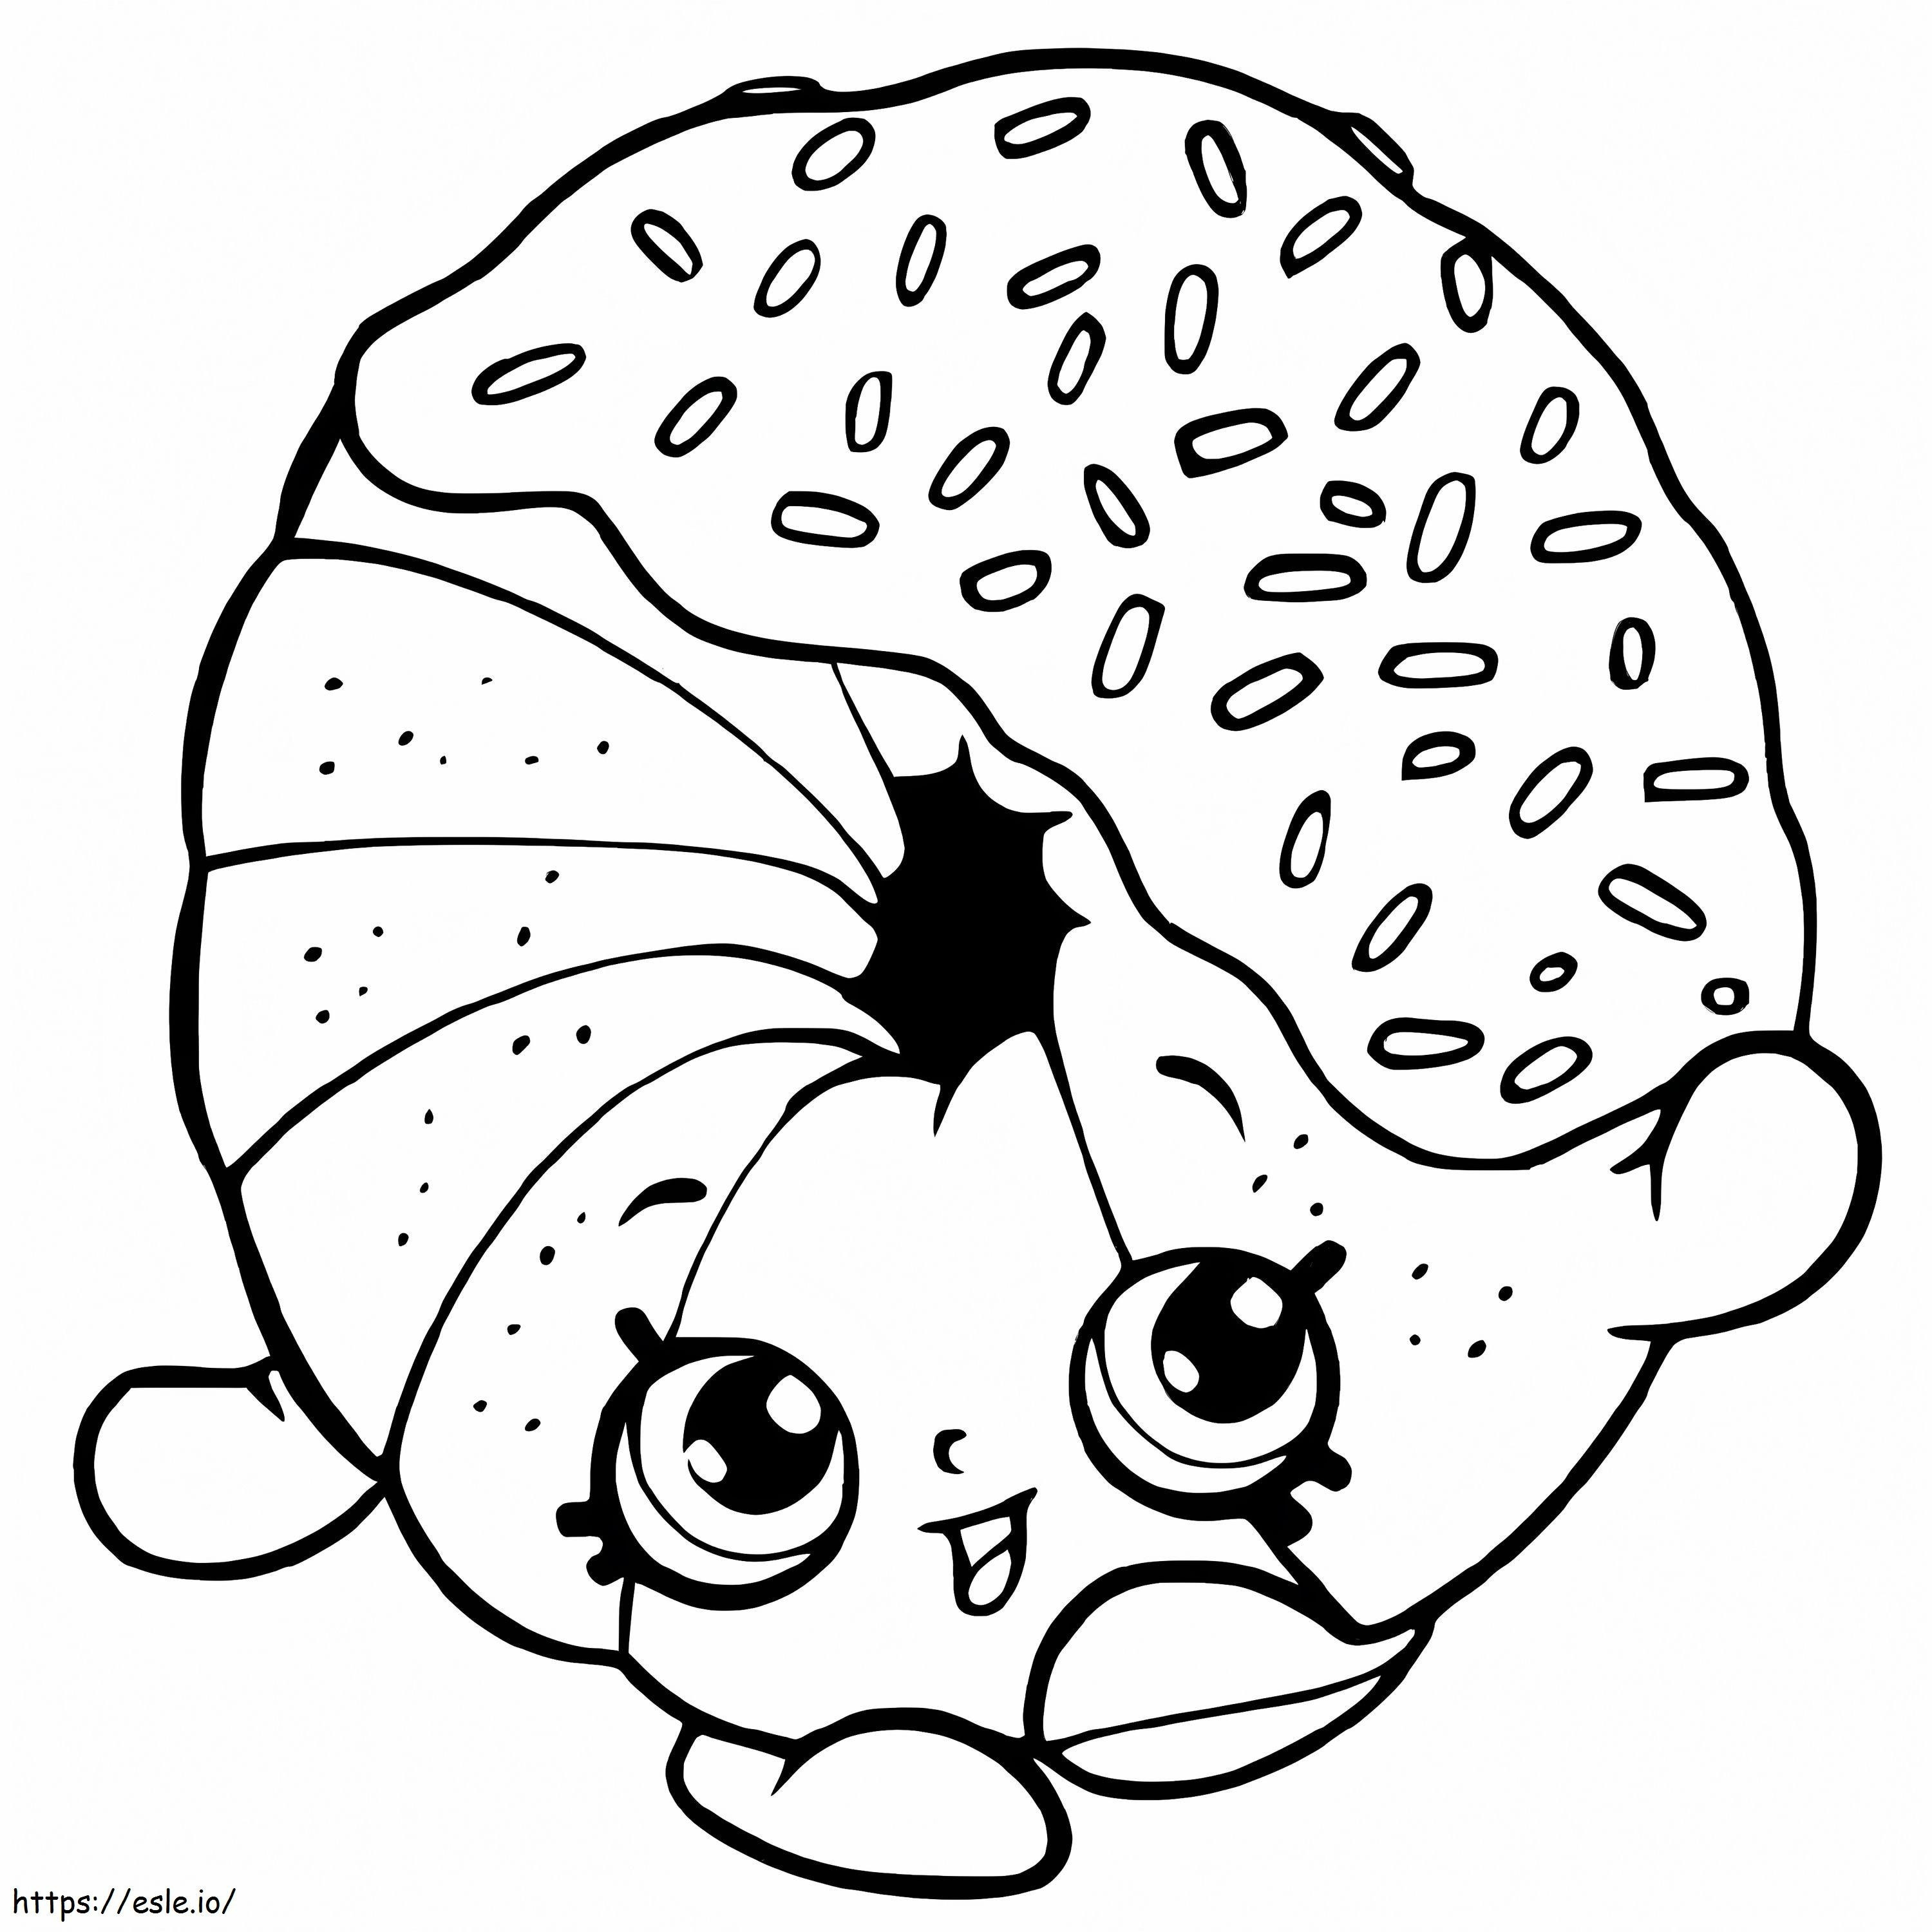 Dippy Shopkin Donut coloring page